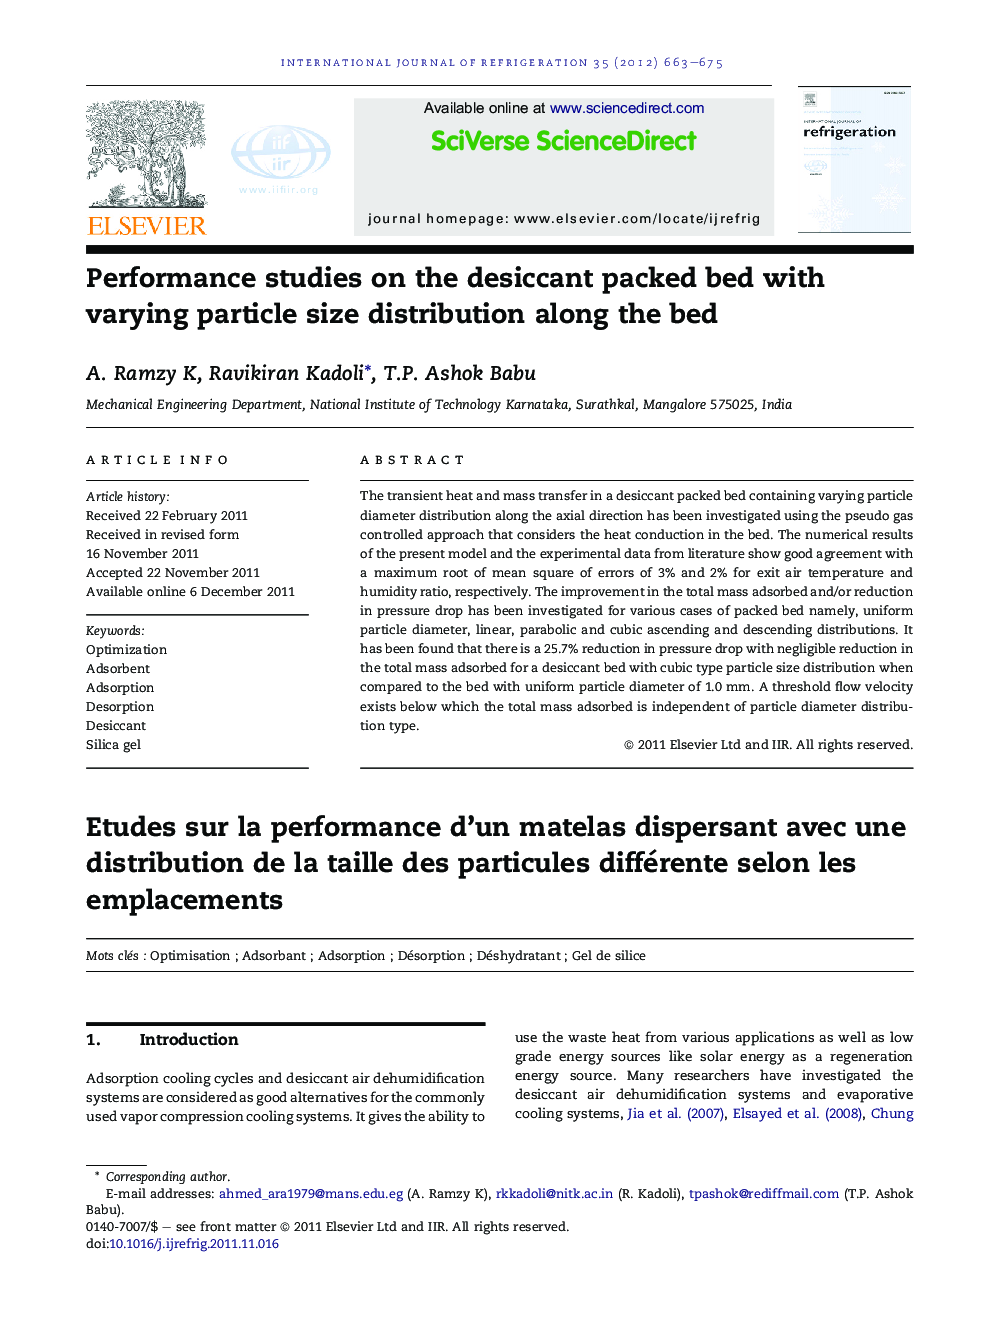 Performance studies on the desiccant packed bed with varying particle size distribution along the bed